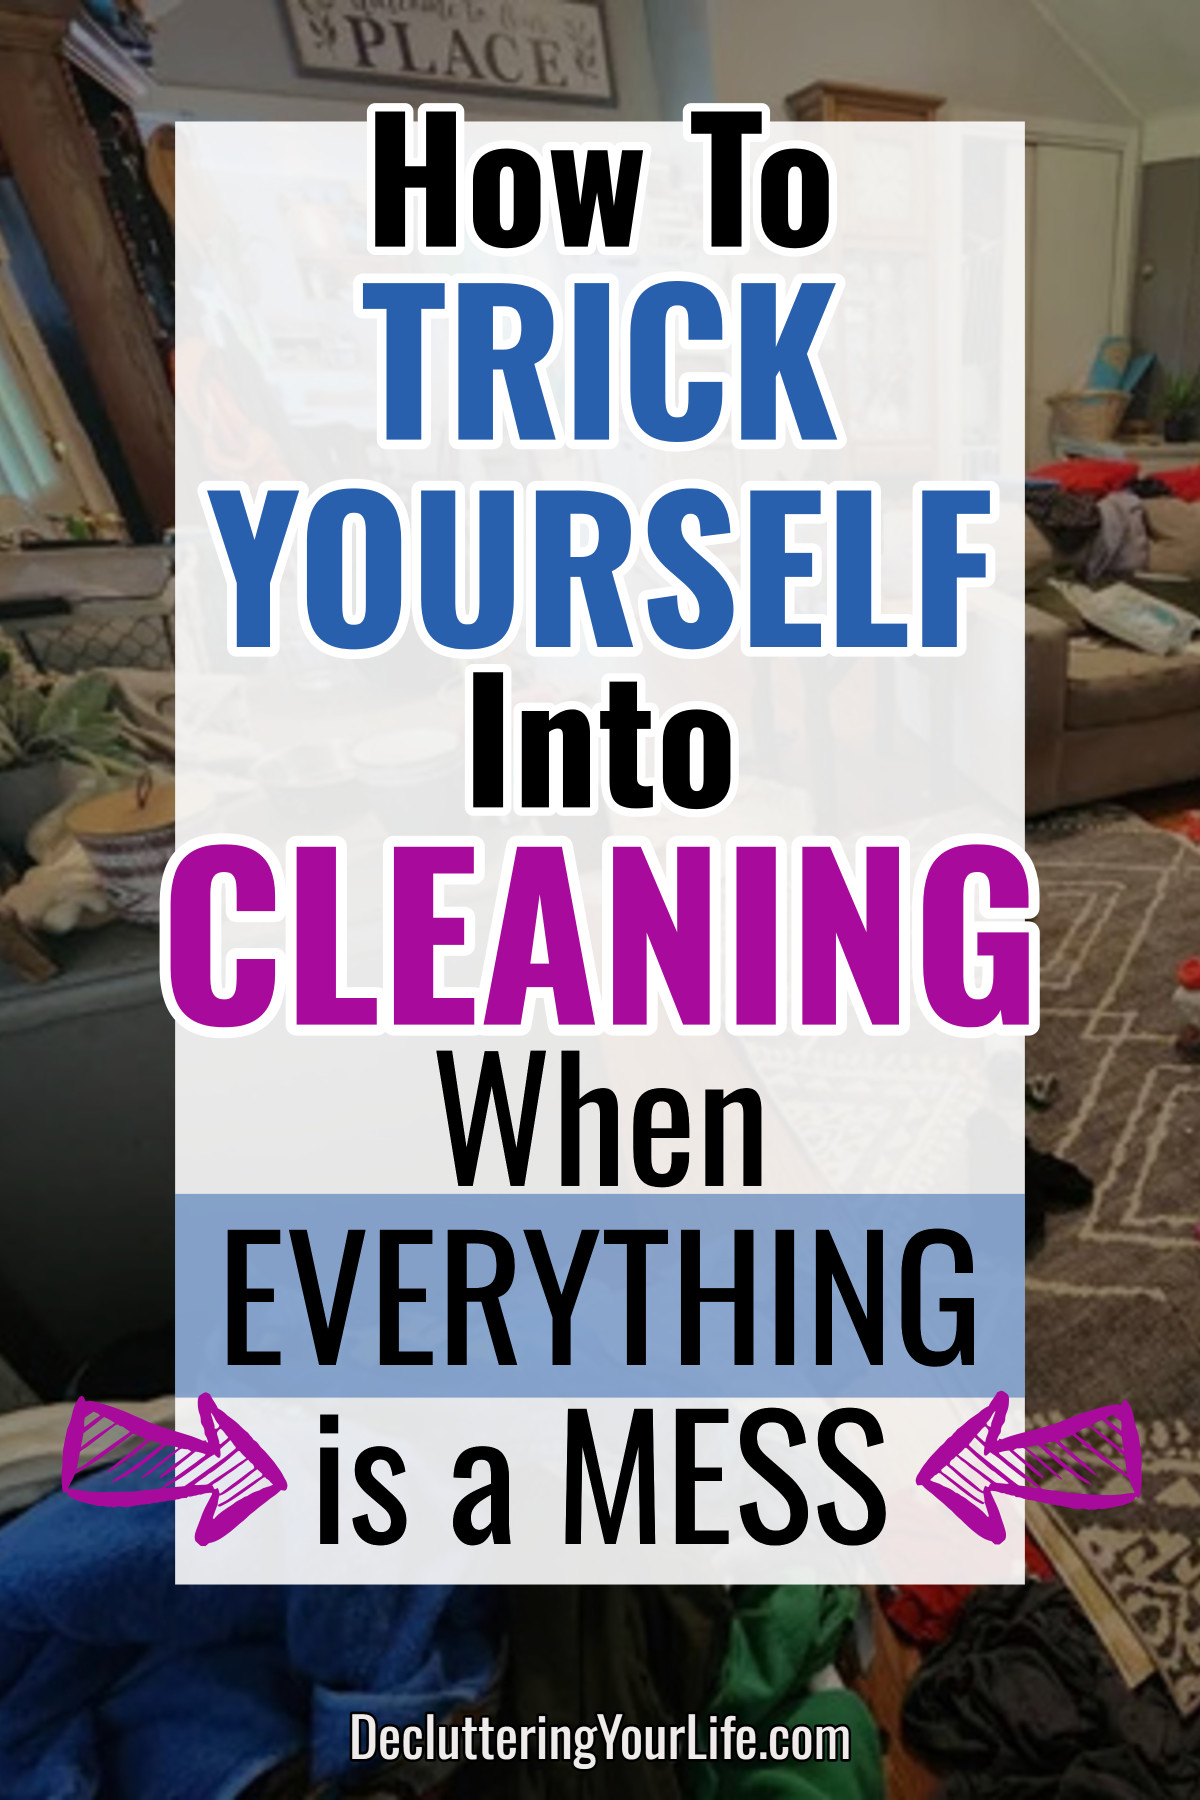 how to trick yourself into cleaning when EVERYTHING is a mess